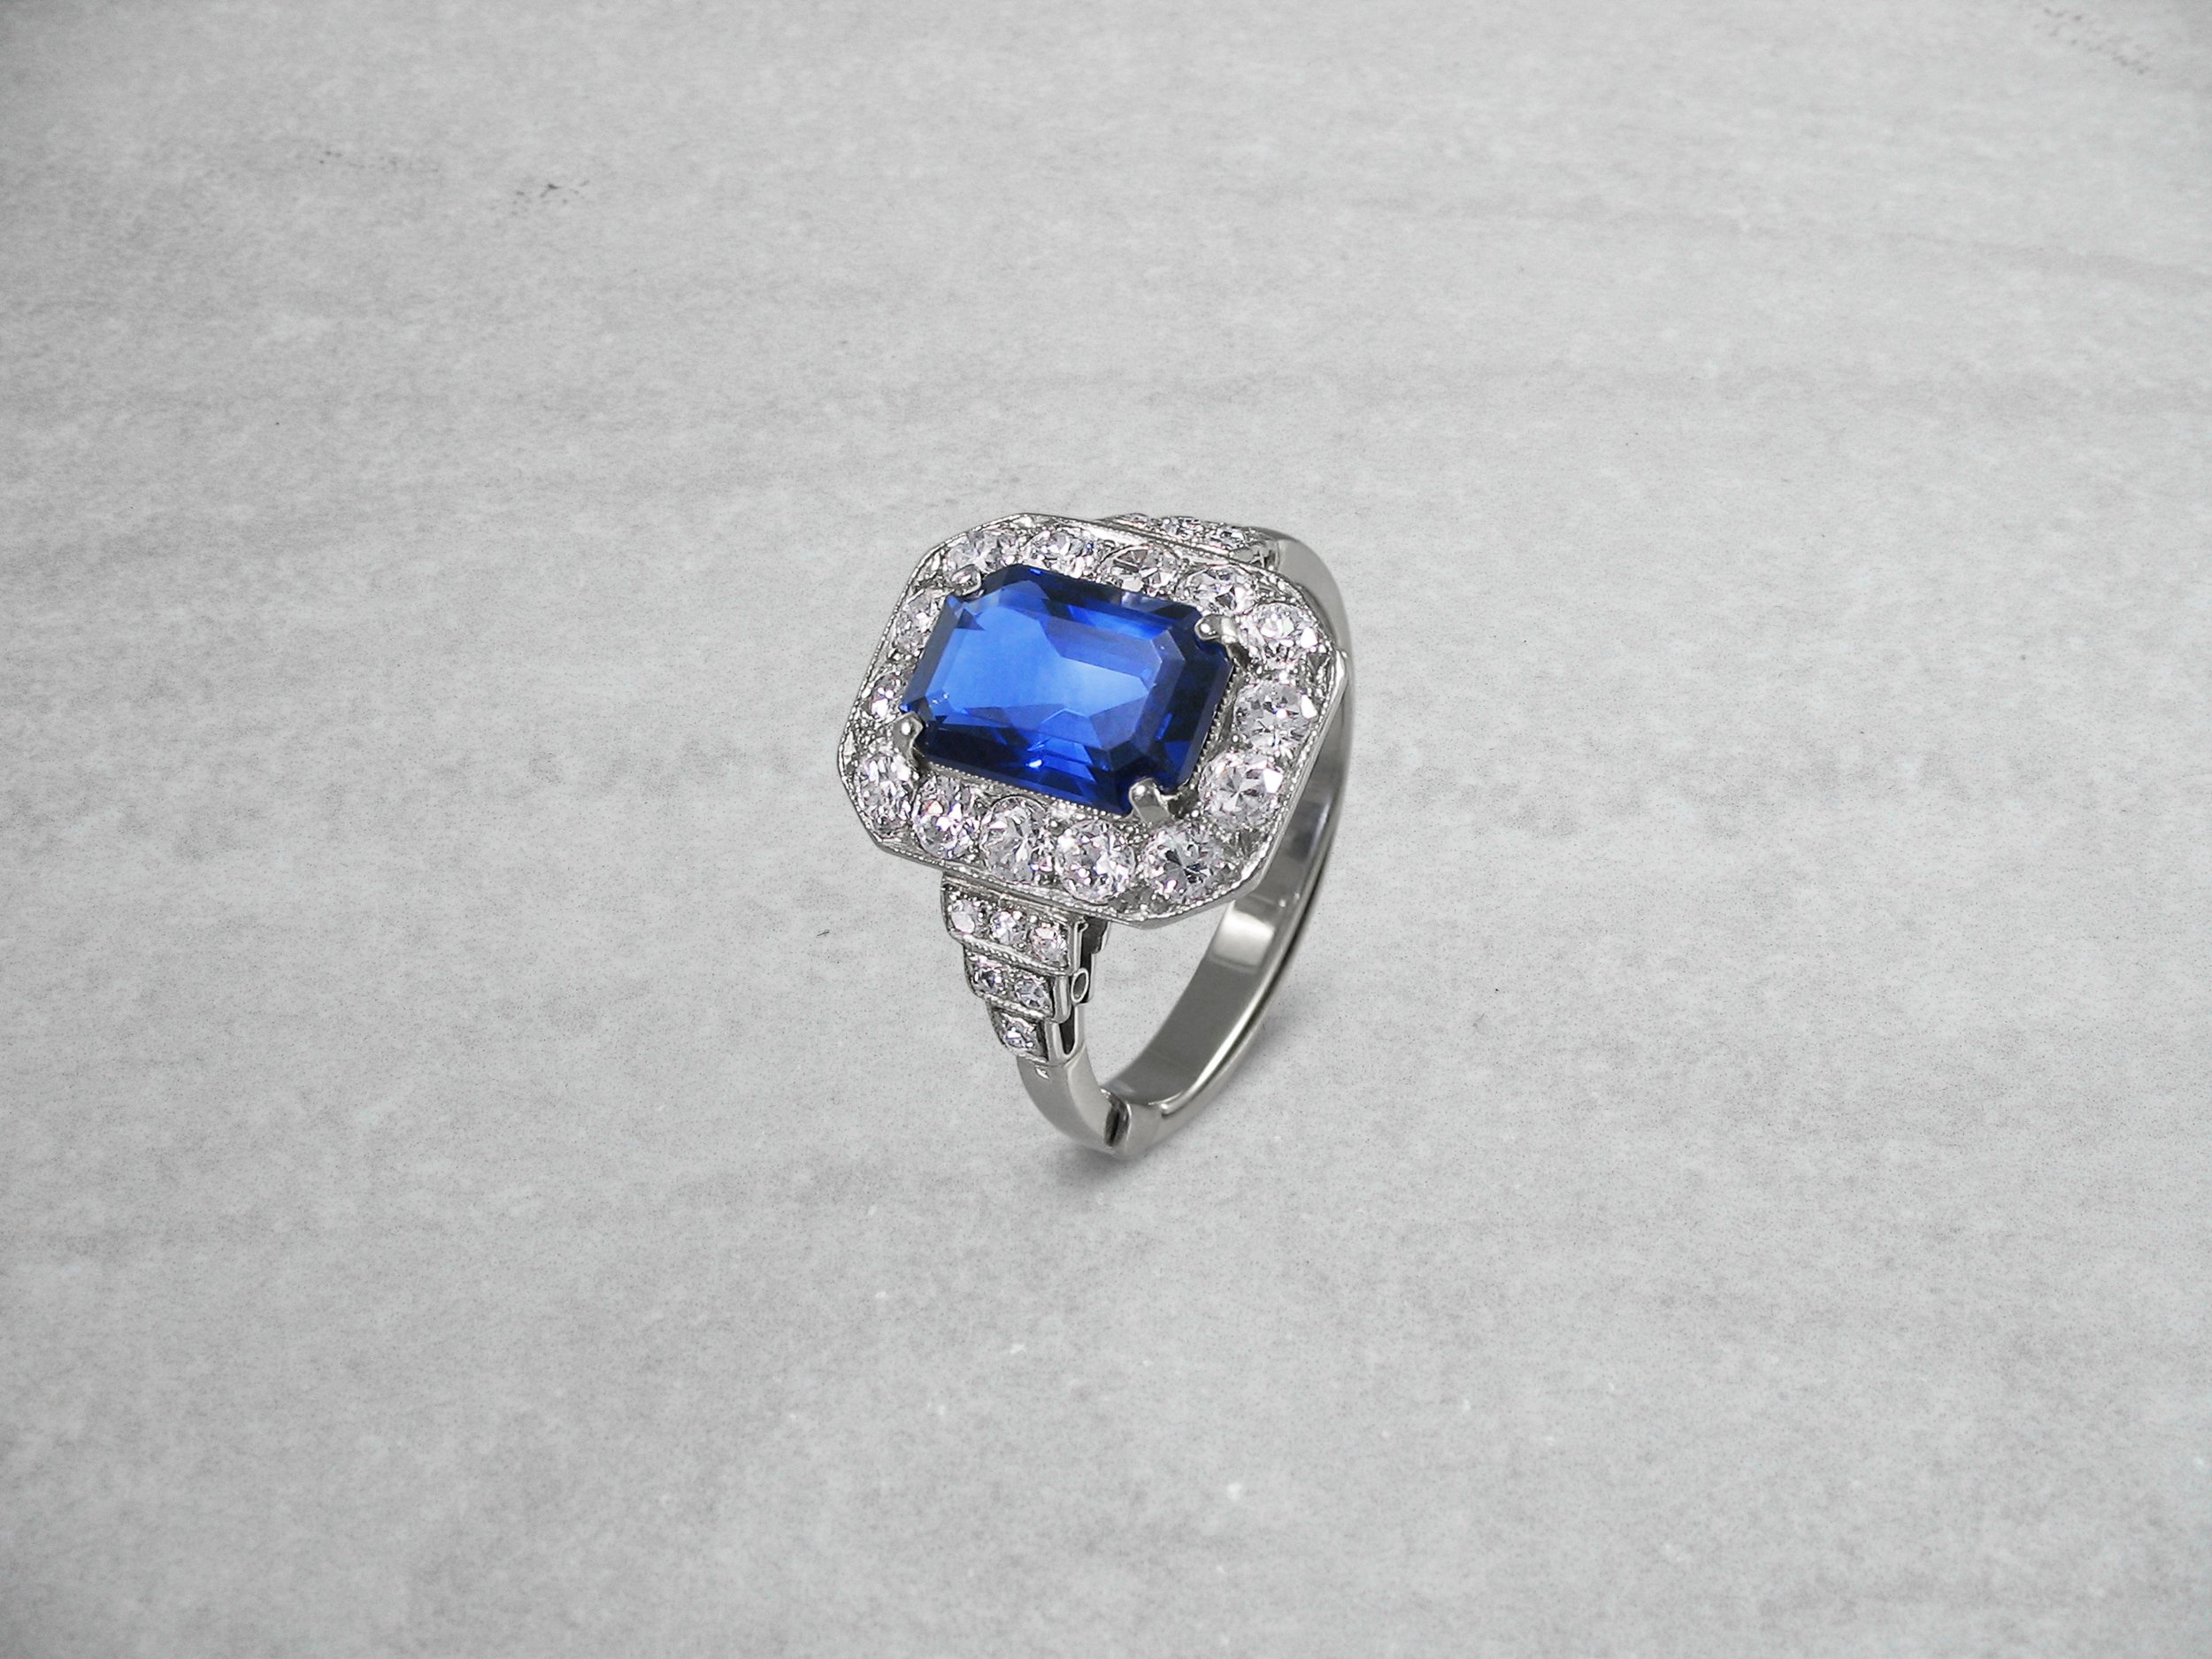 Art deco style with a step cut sapphire